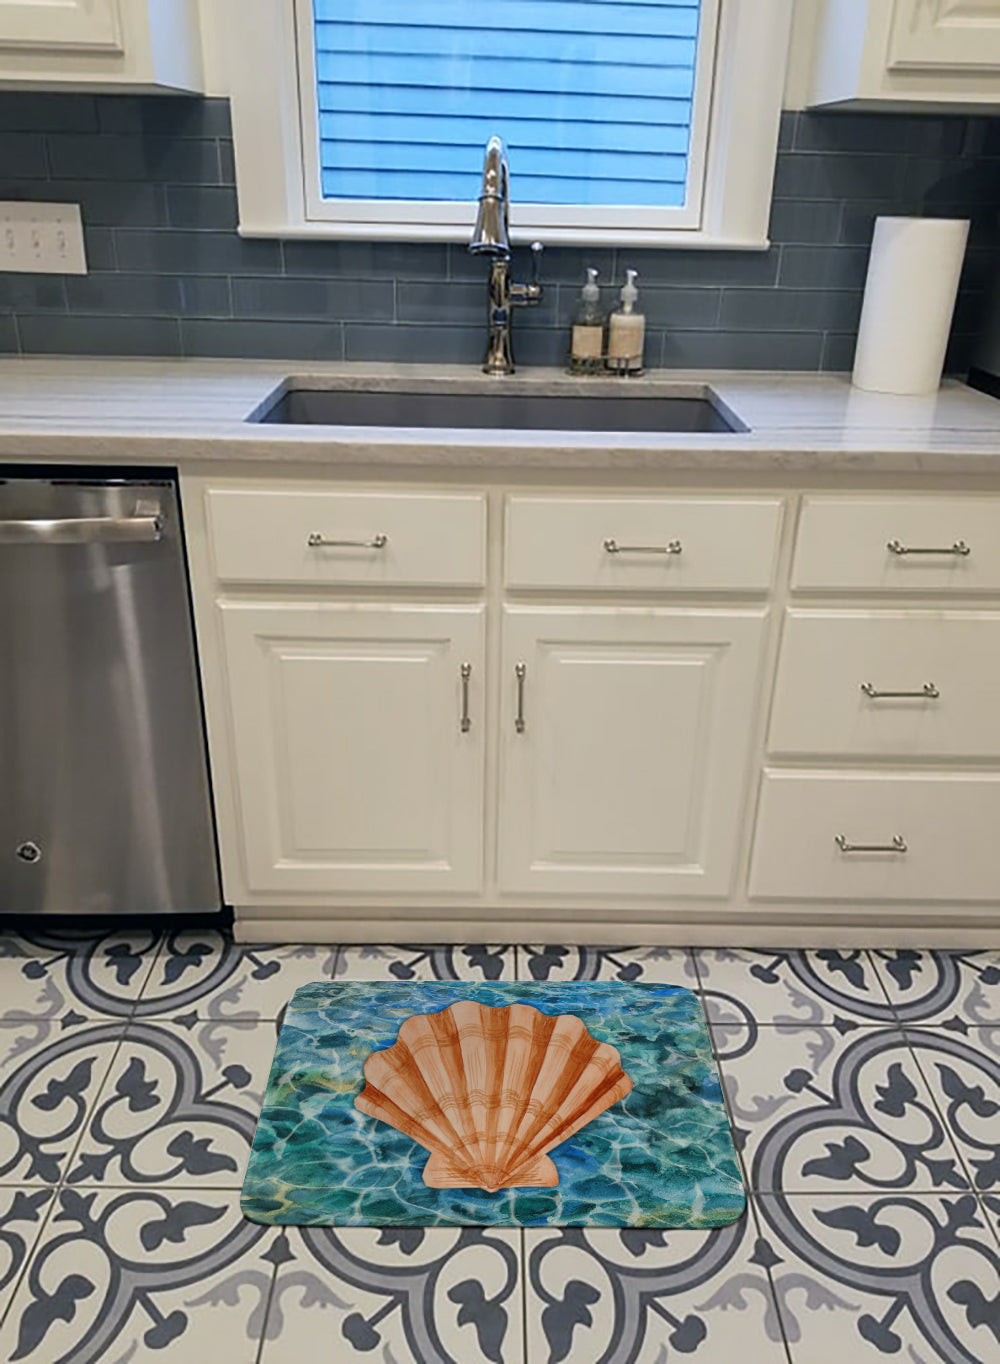 Scallop Shell and Water Machine Washable Memory Foam Mat BB5367RUG - the-store.com